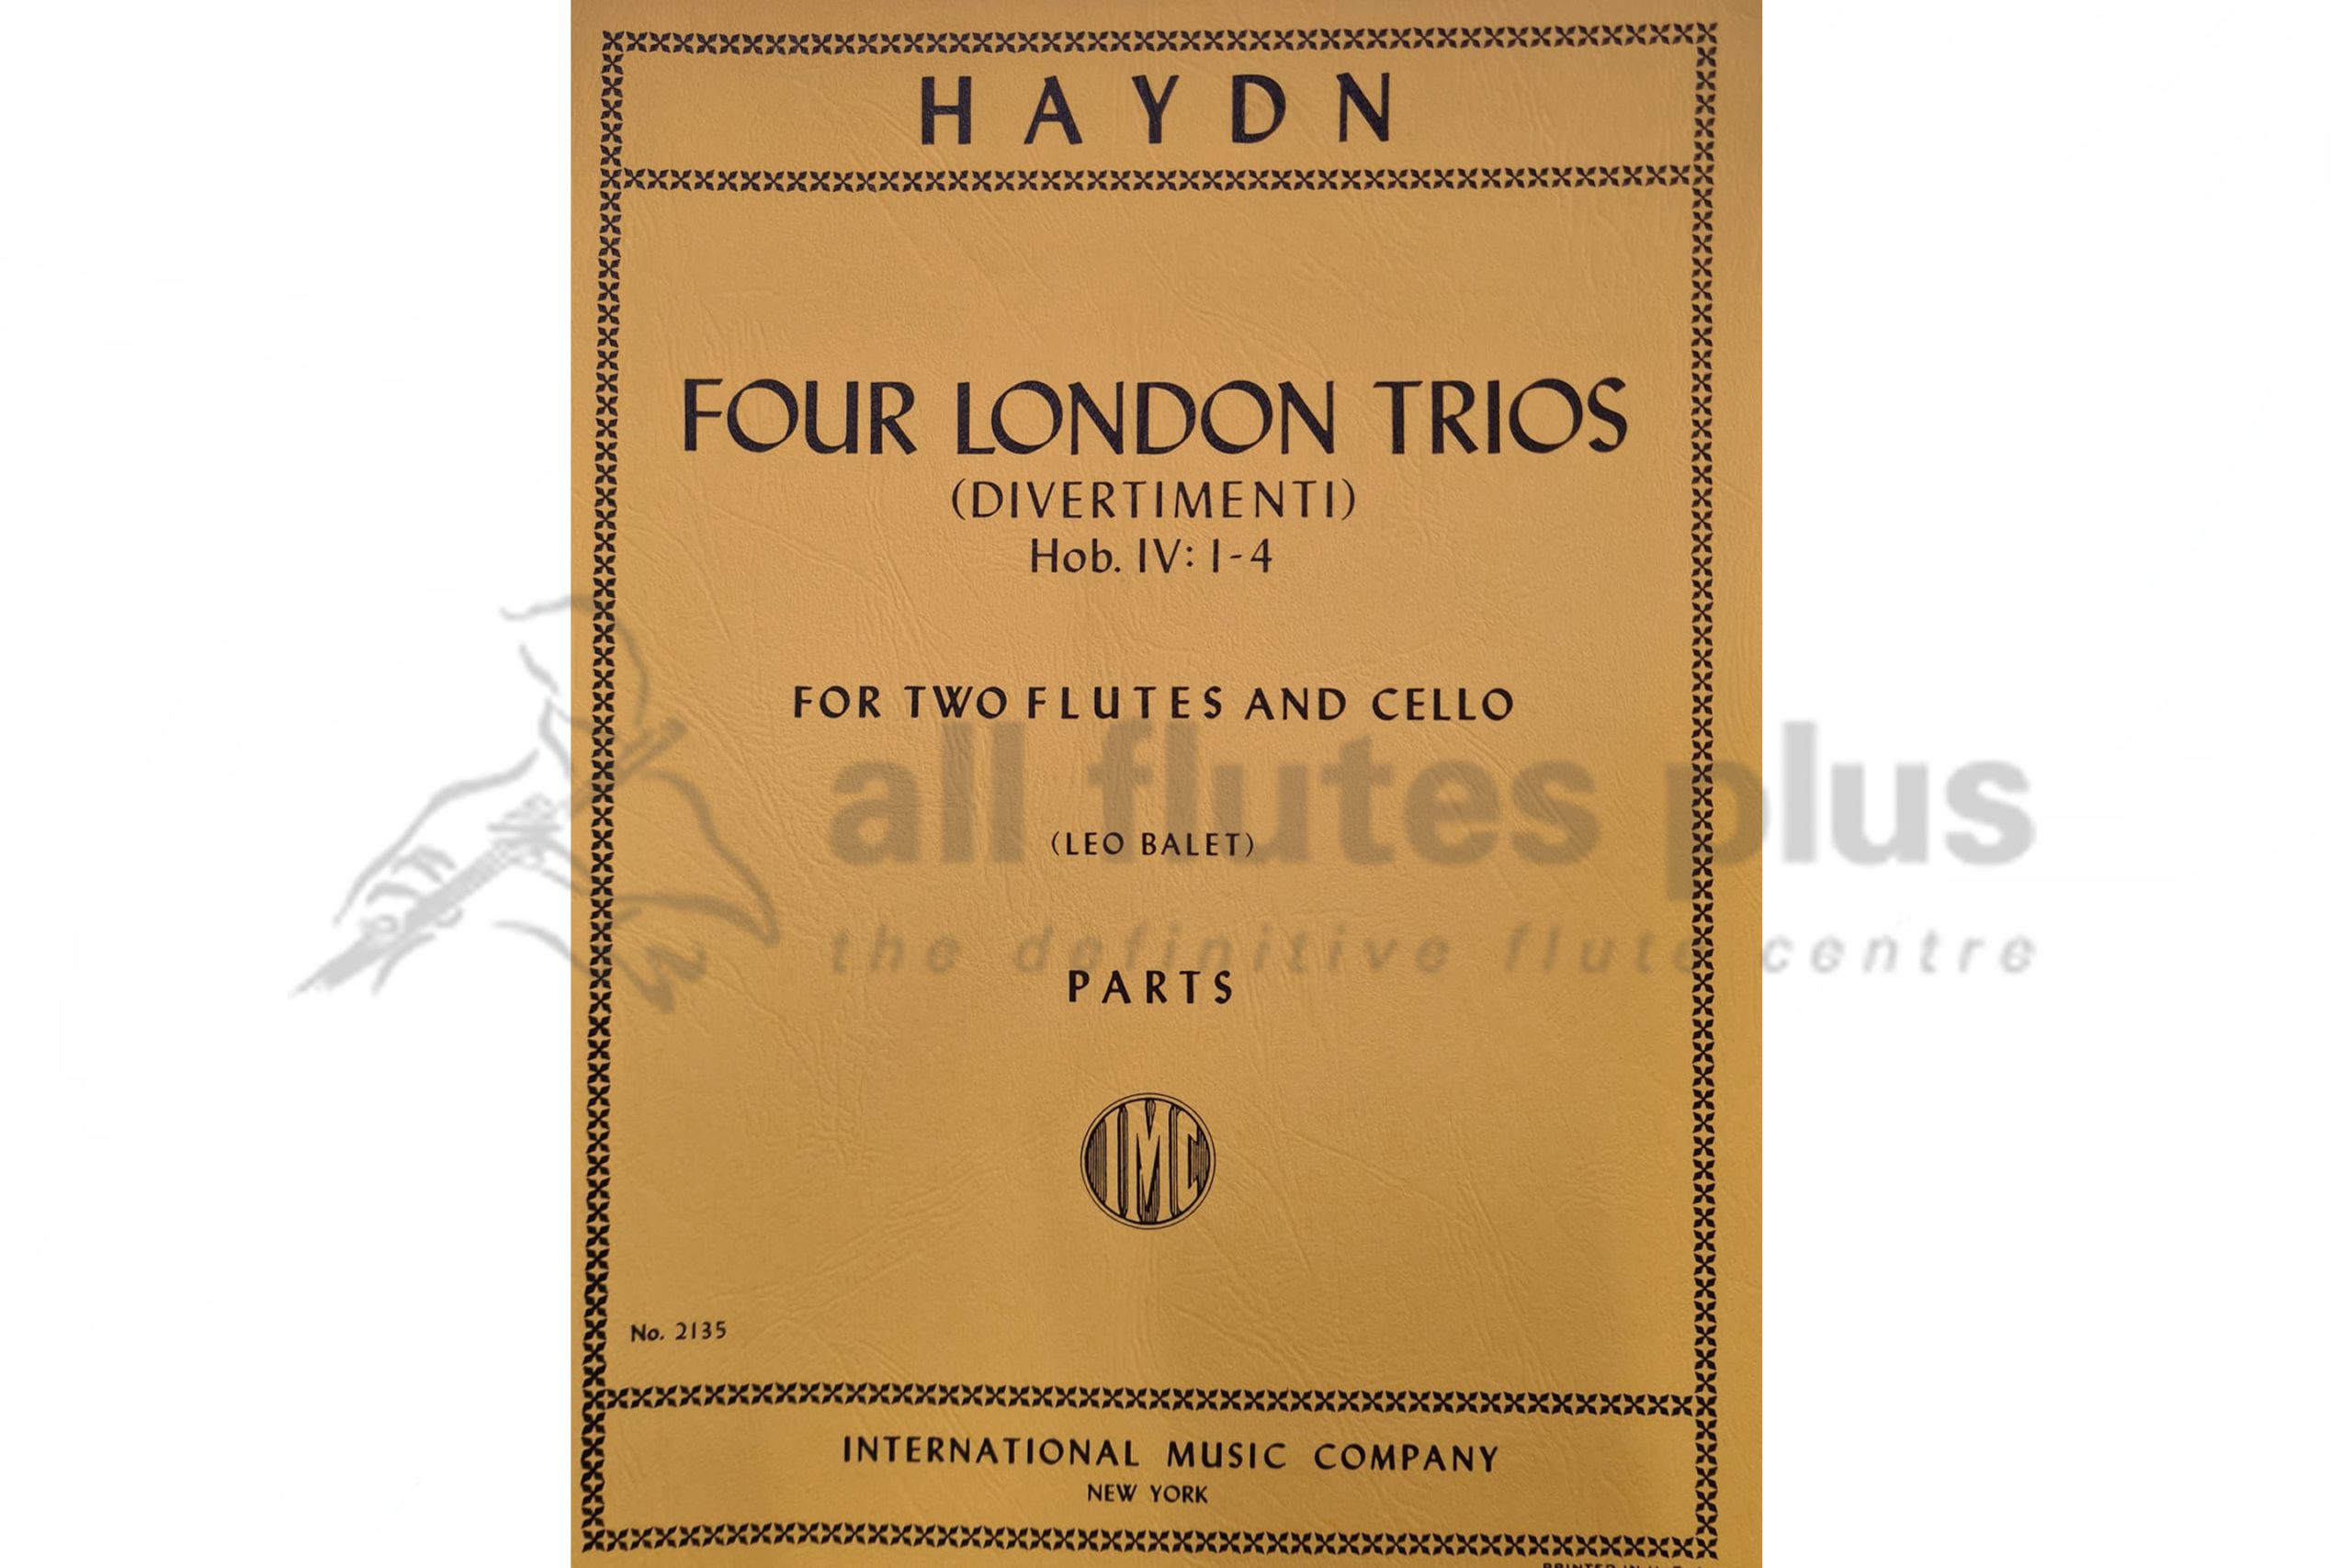 Haydn Four London Trios for Two Flutes and Cello